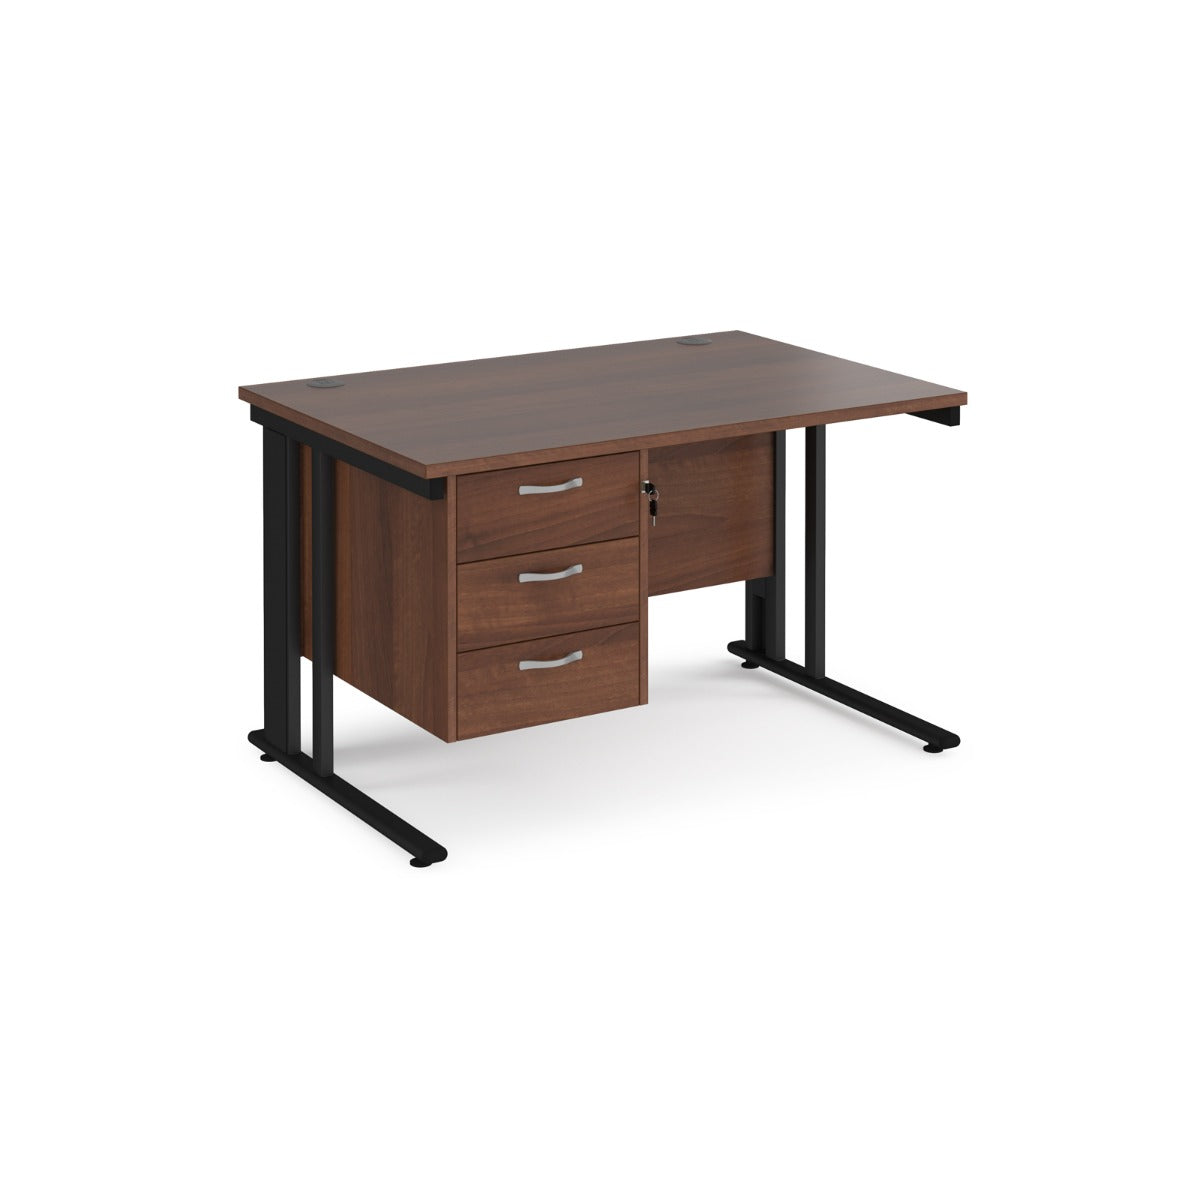 Maestro 800mm Deep Straight Cable Management Leg Office Desk with Three Drawer Pedestal